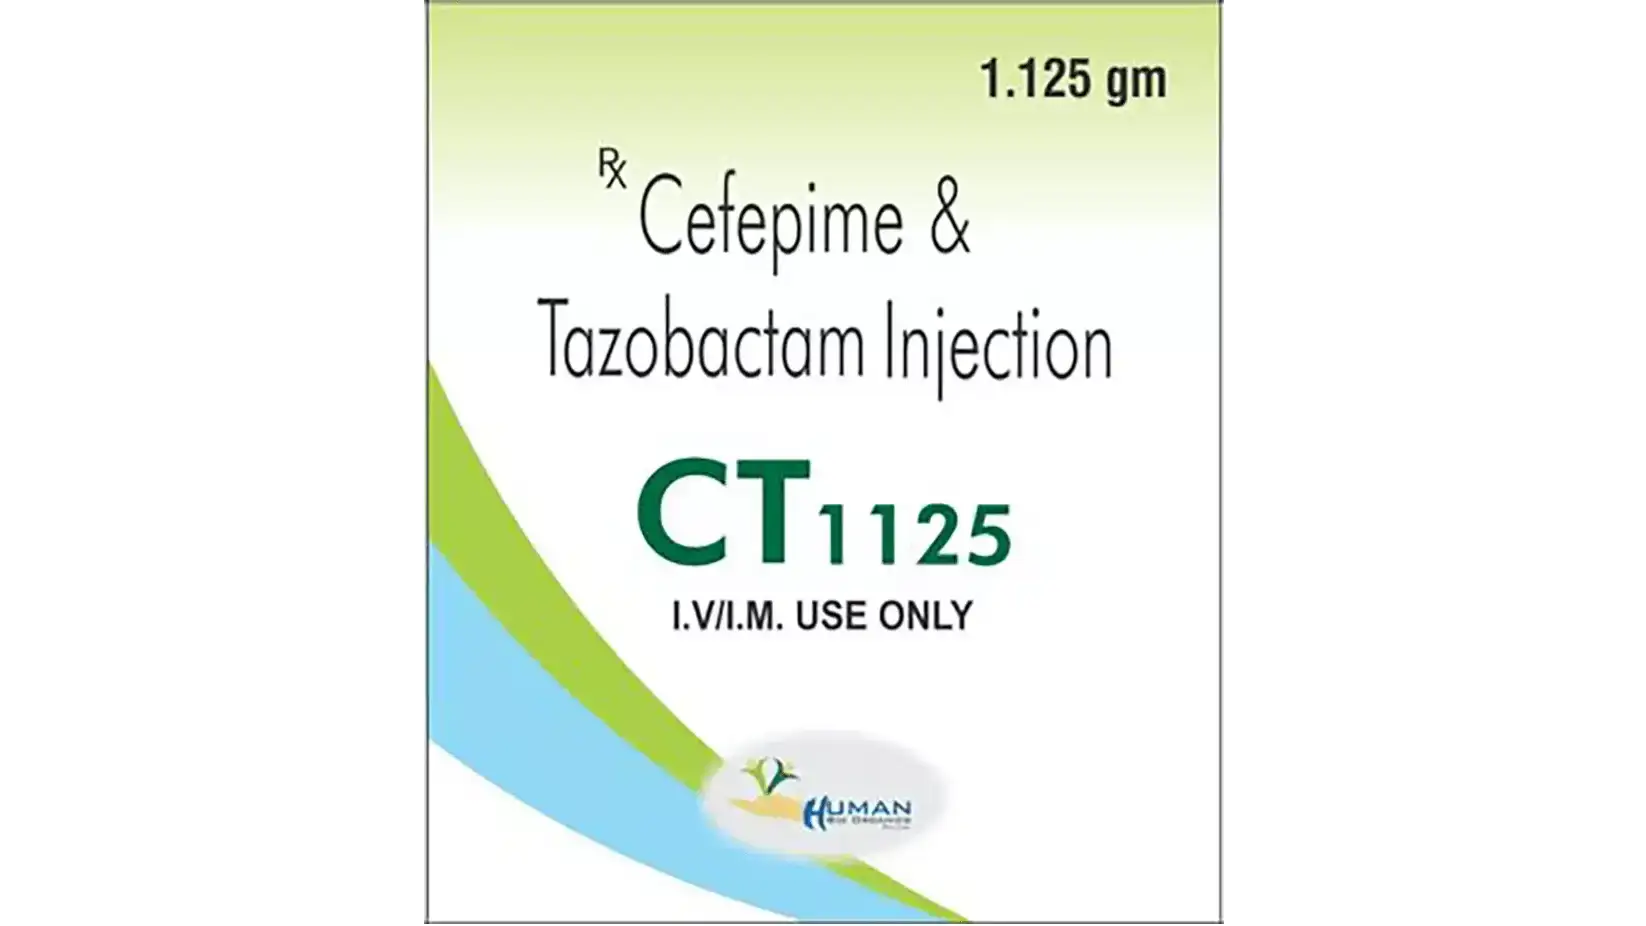 CT 1125 Injection